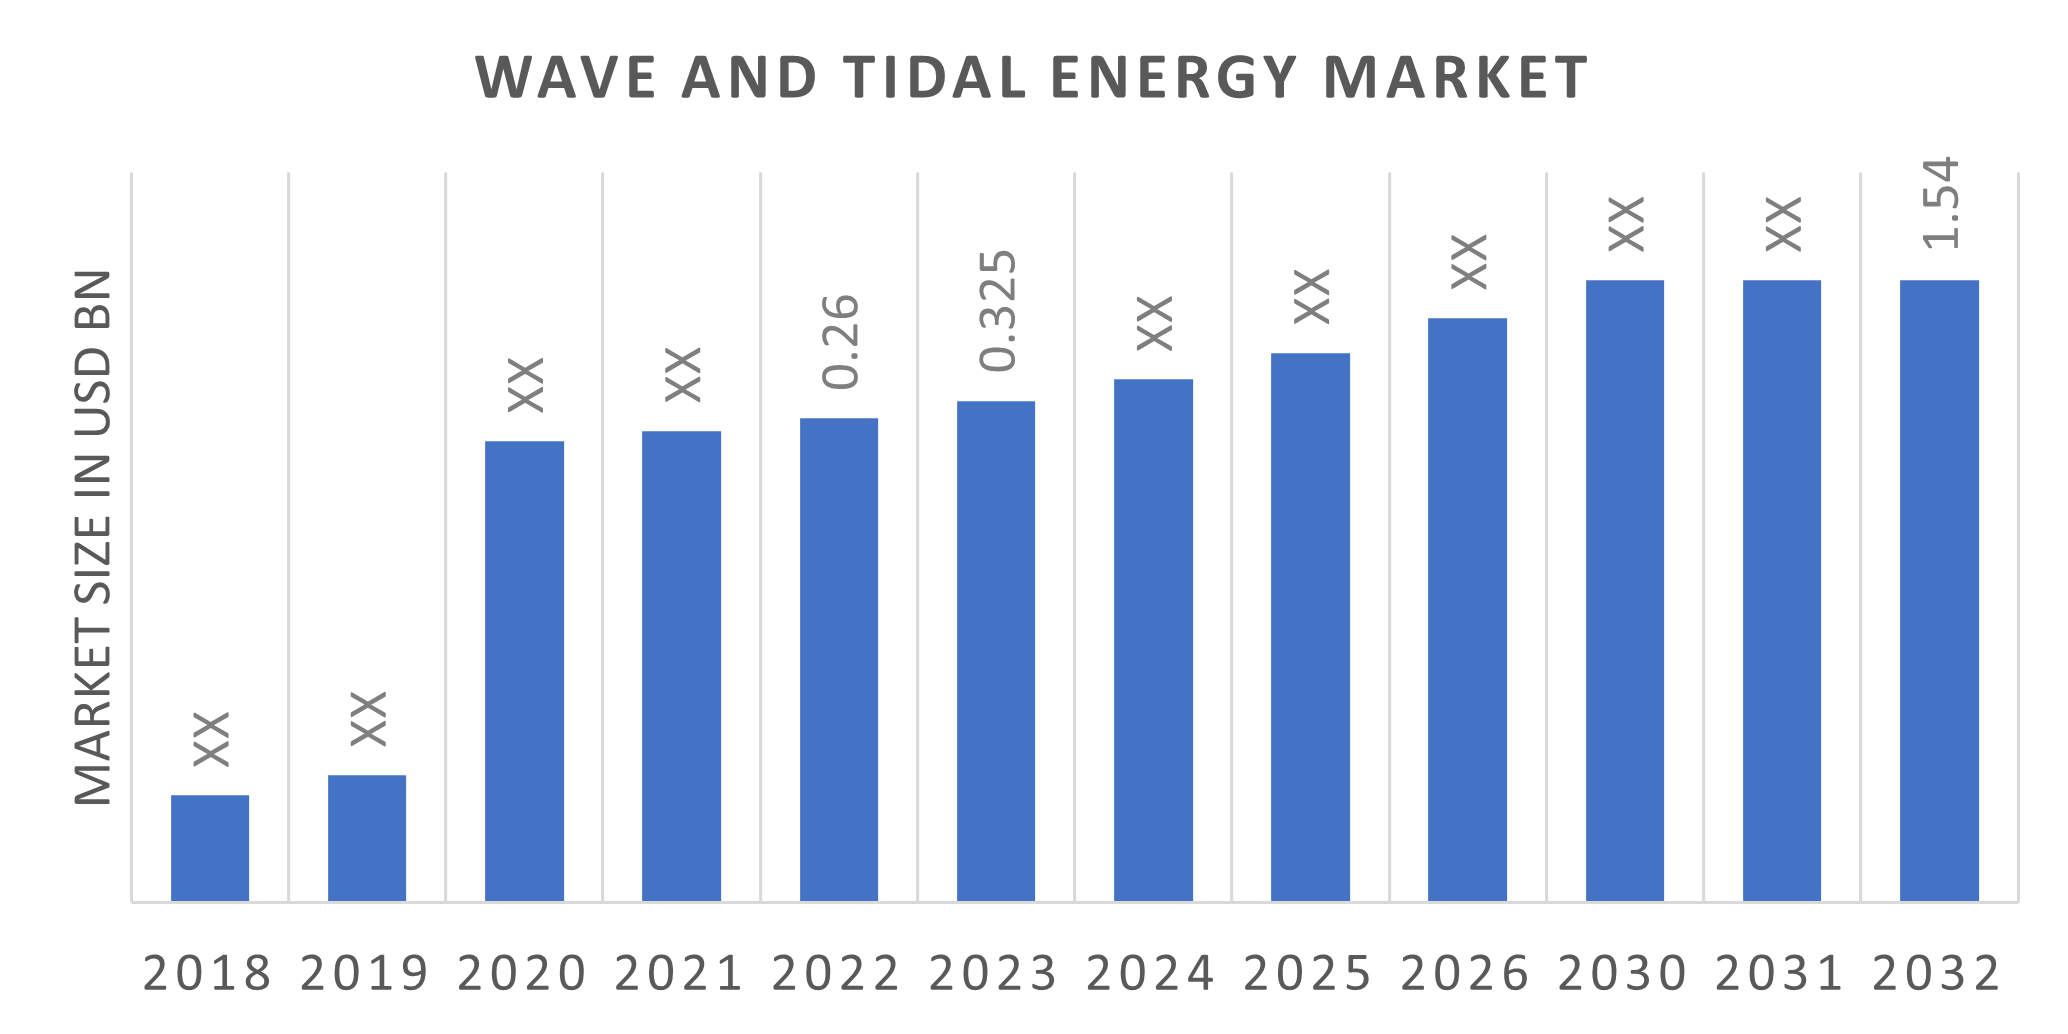 Global Wave and Tidal Energy Market Overview1